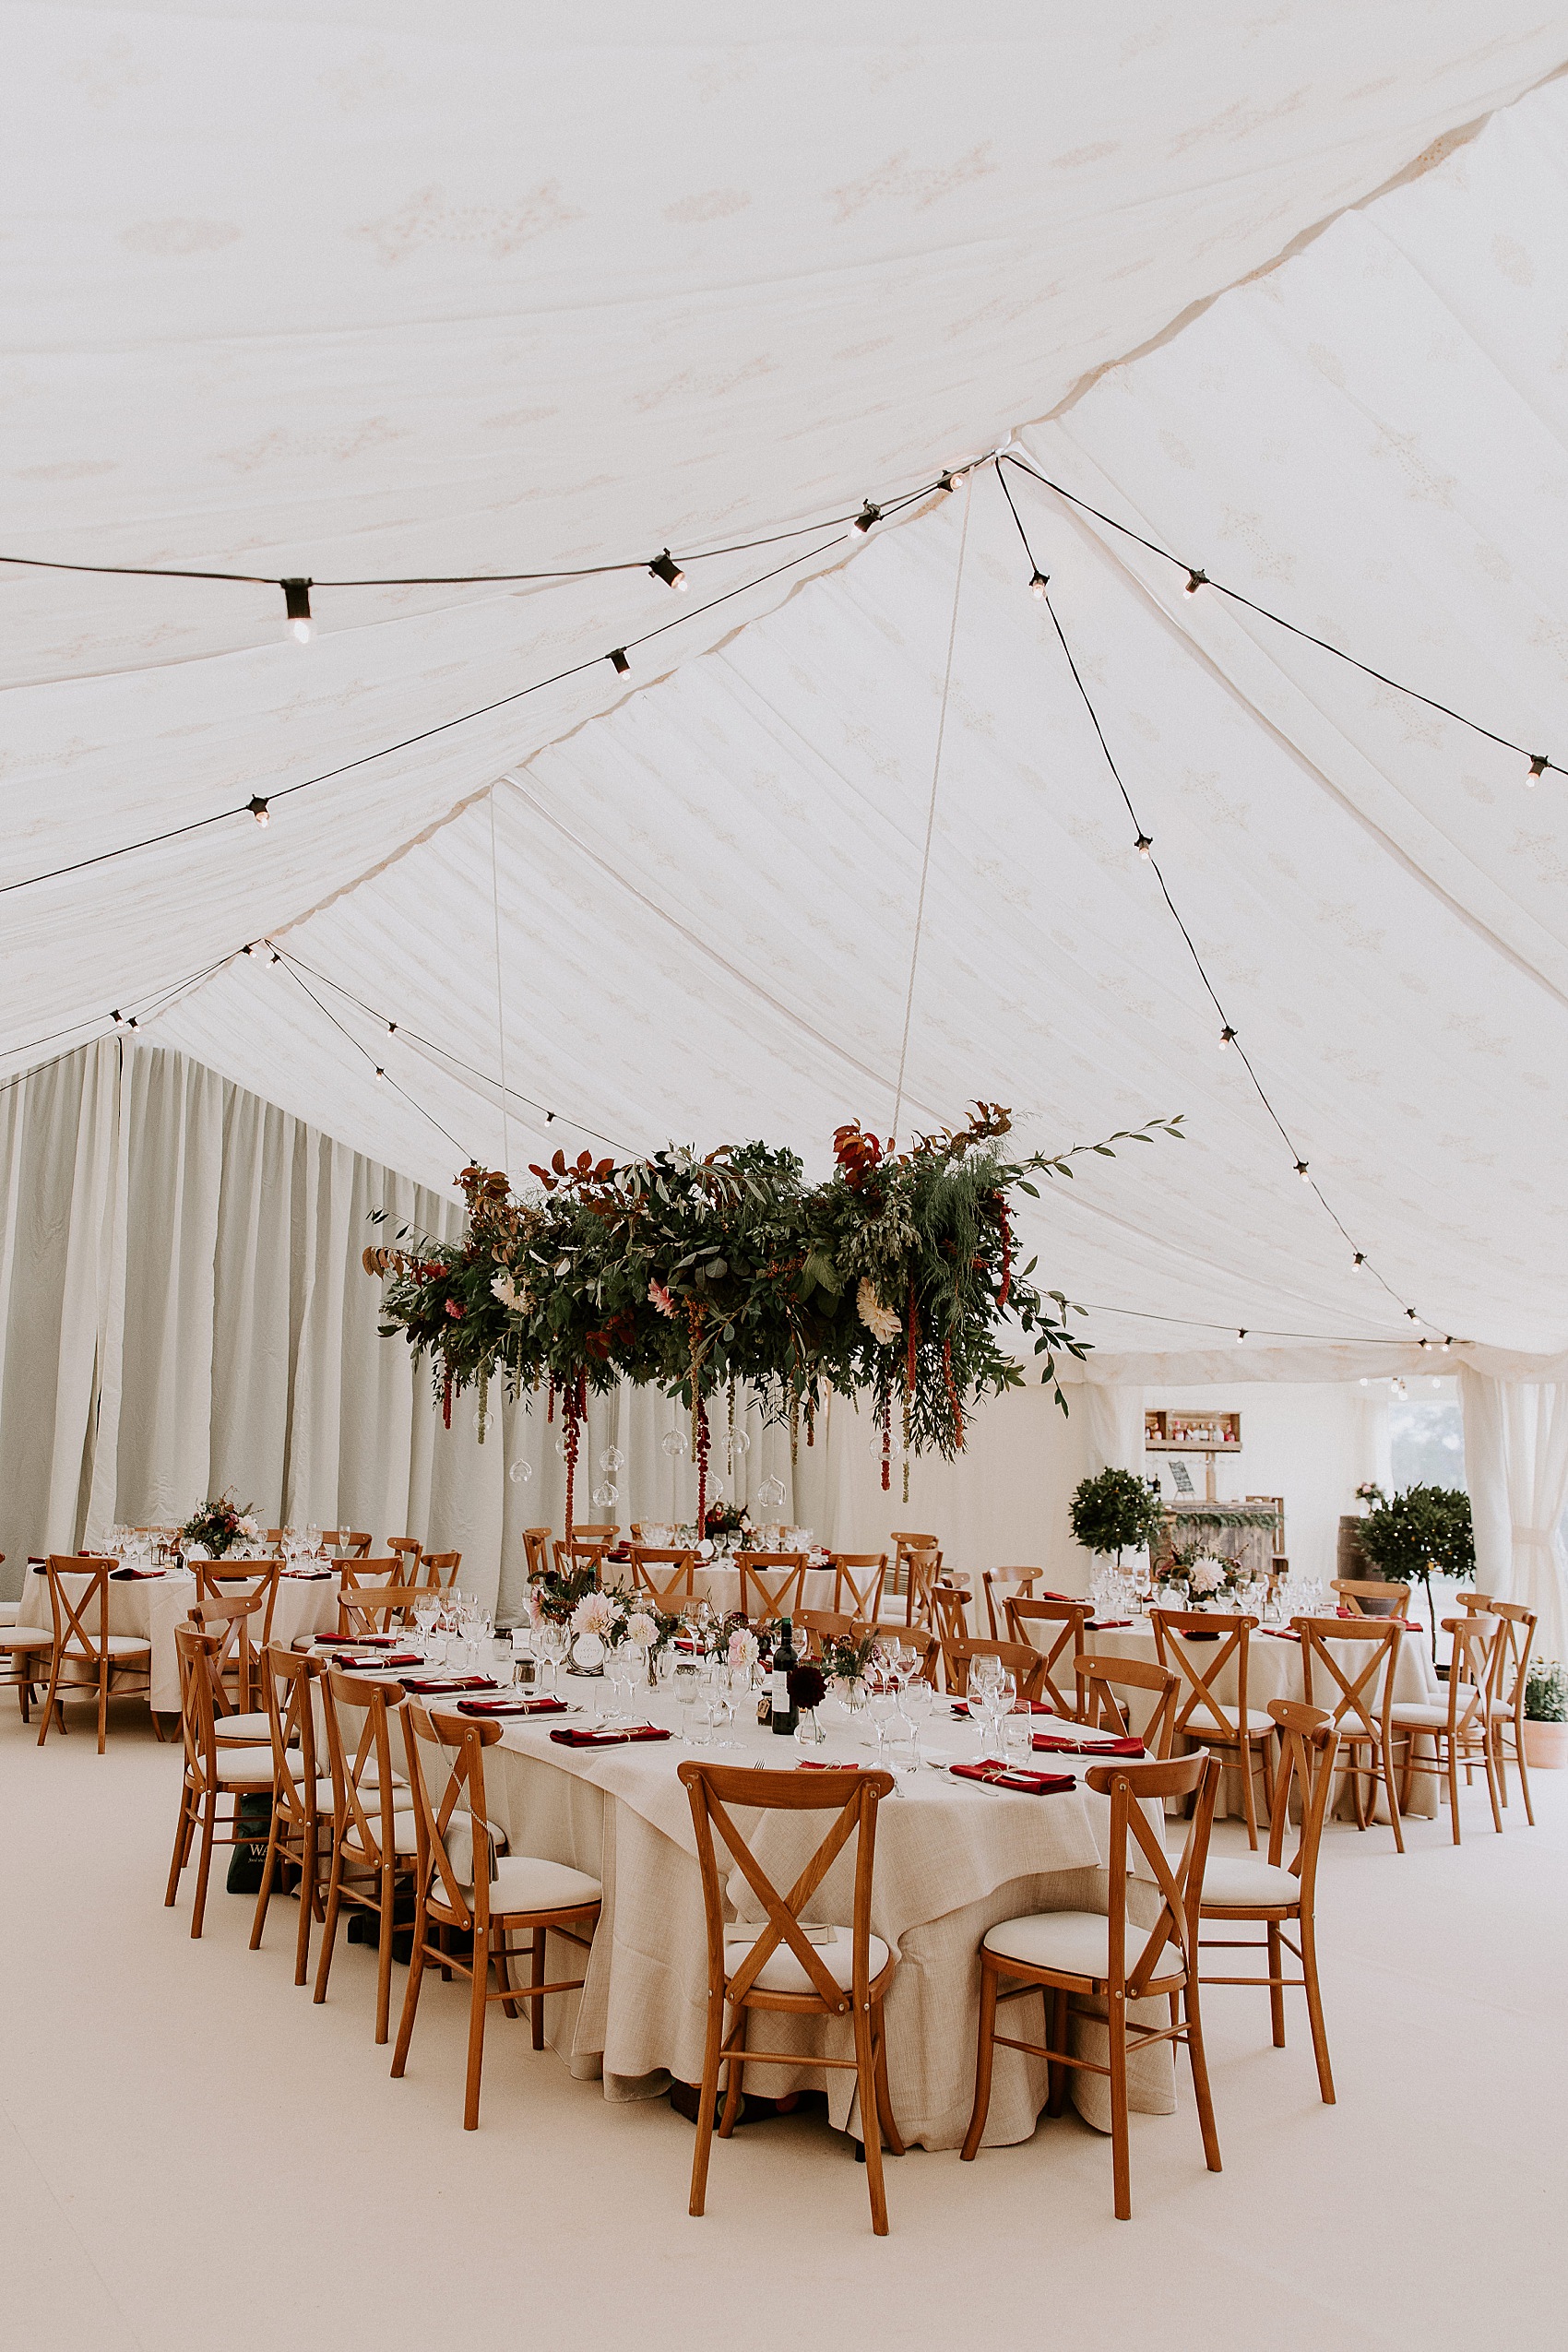 35 Marquee wedding at home